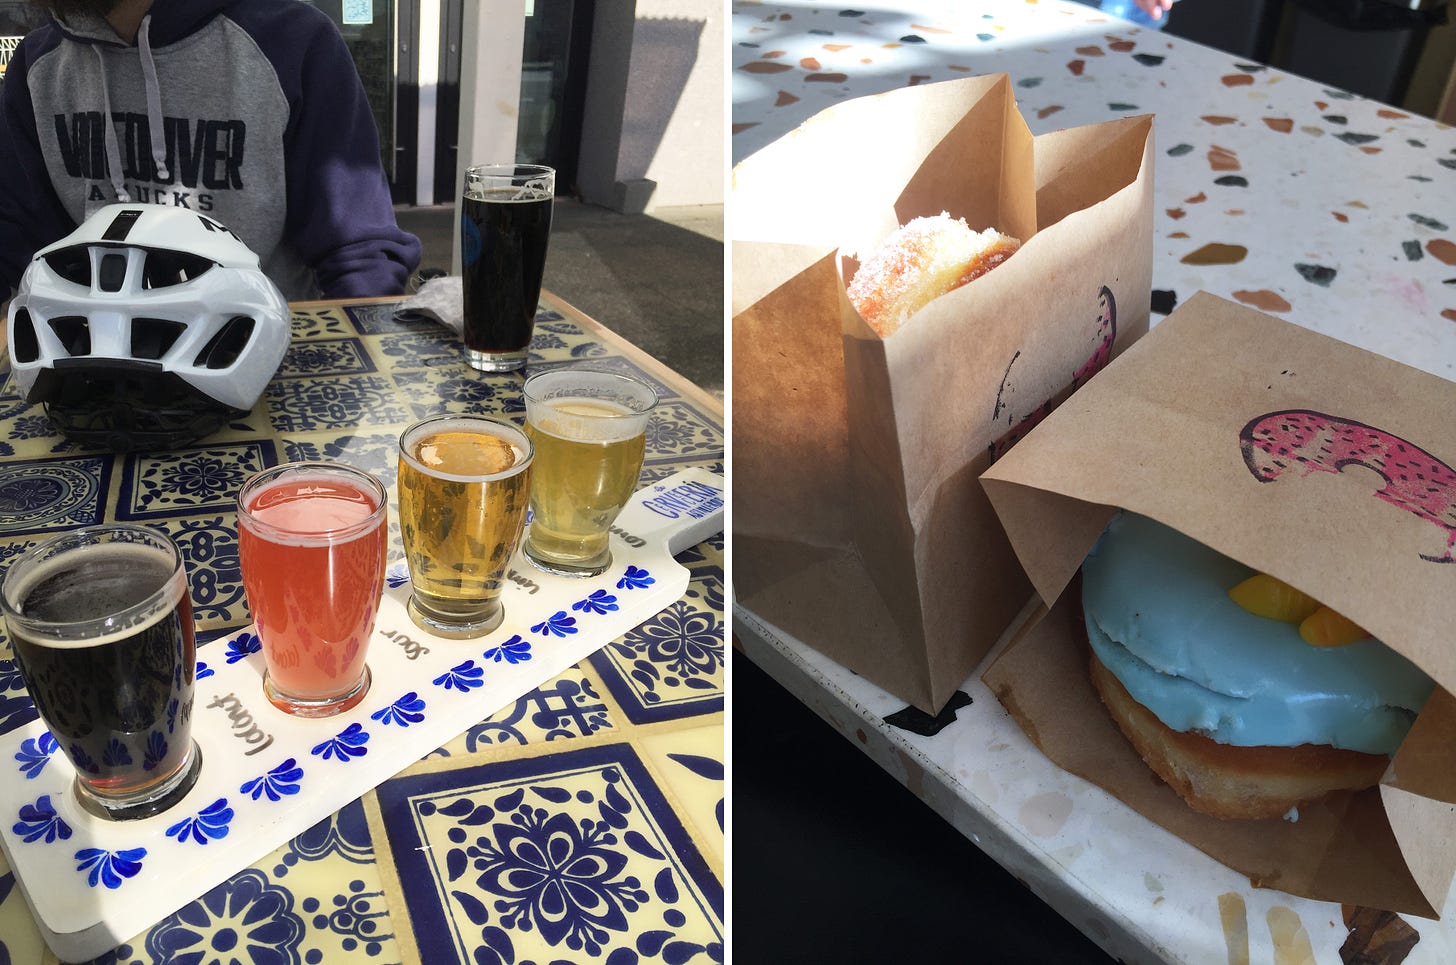 Left image: a flight of four beers, ranging from light to pink to dark, sit in a blue and white paddle on top of a table tiled in a similar pattern. Across the table is a bike helmet and a tall glass of dark beer. Right image: on a speckled countertop, two paper bags with a pink donut-shaped logo on the front. One on its side has a donut with blue icing, and the other is upright with a sugar-coated jelly donut just visible.